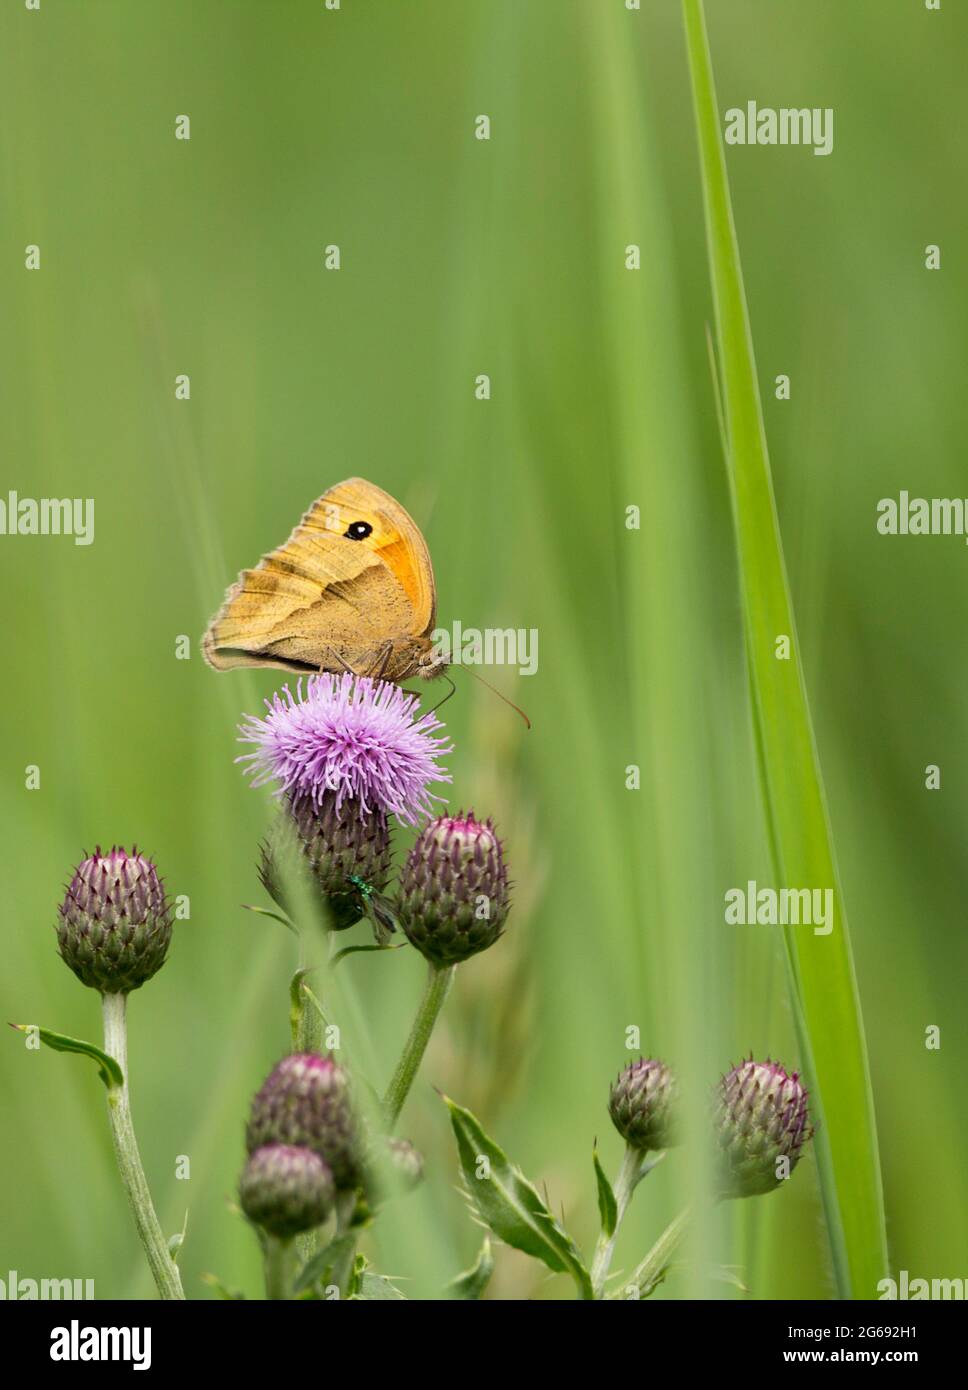 Small heath butterfly (Coenonympha pamphilus) settled on a creeping thistle lilac flower head (Cirsium arvense)  wings orange brown with eye marking Stock Photo